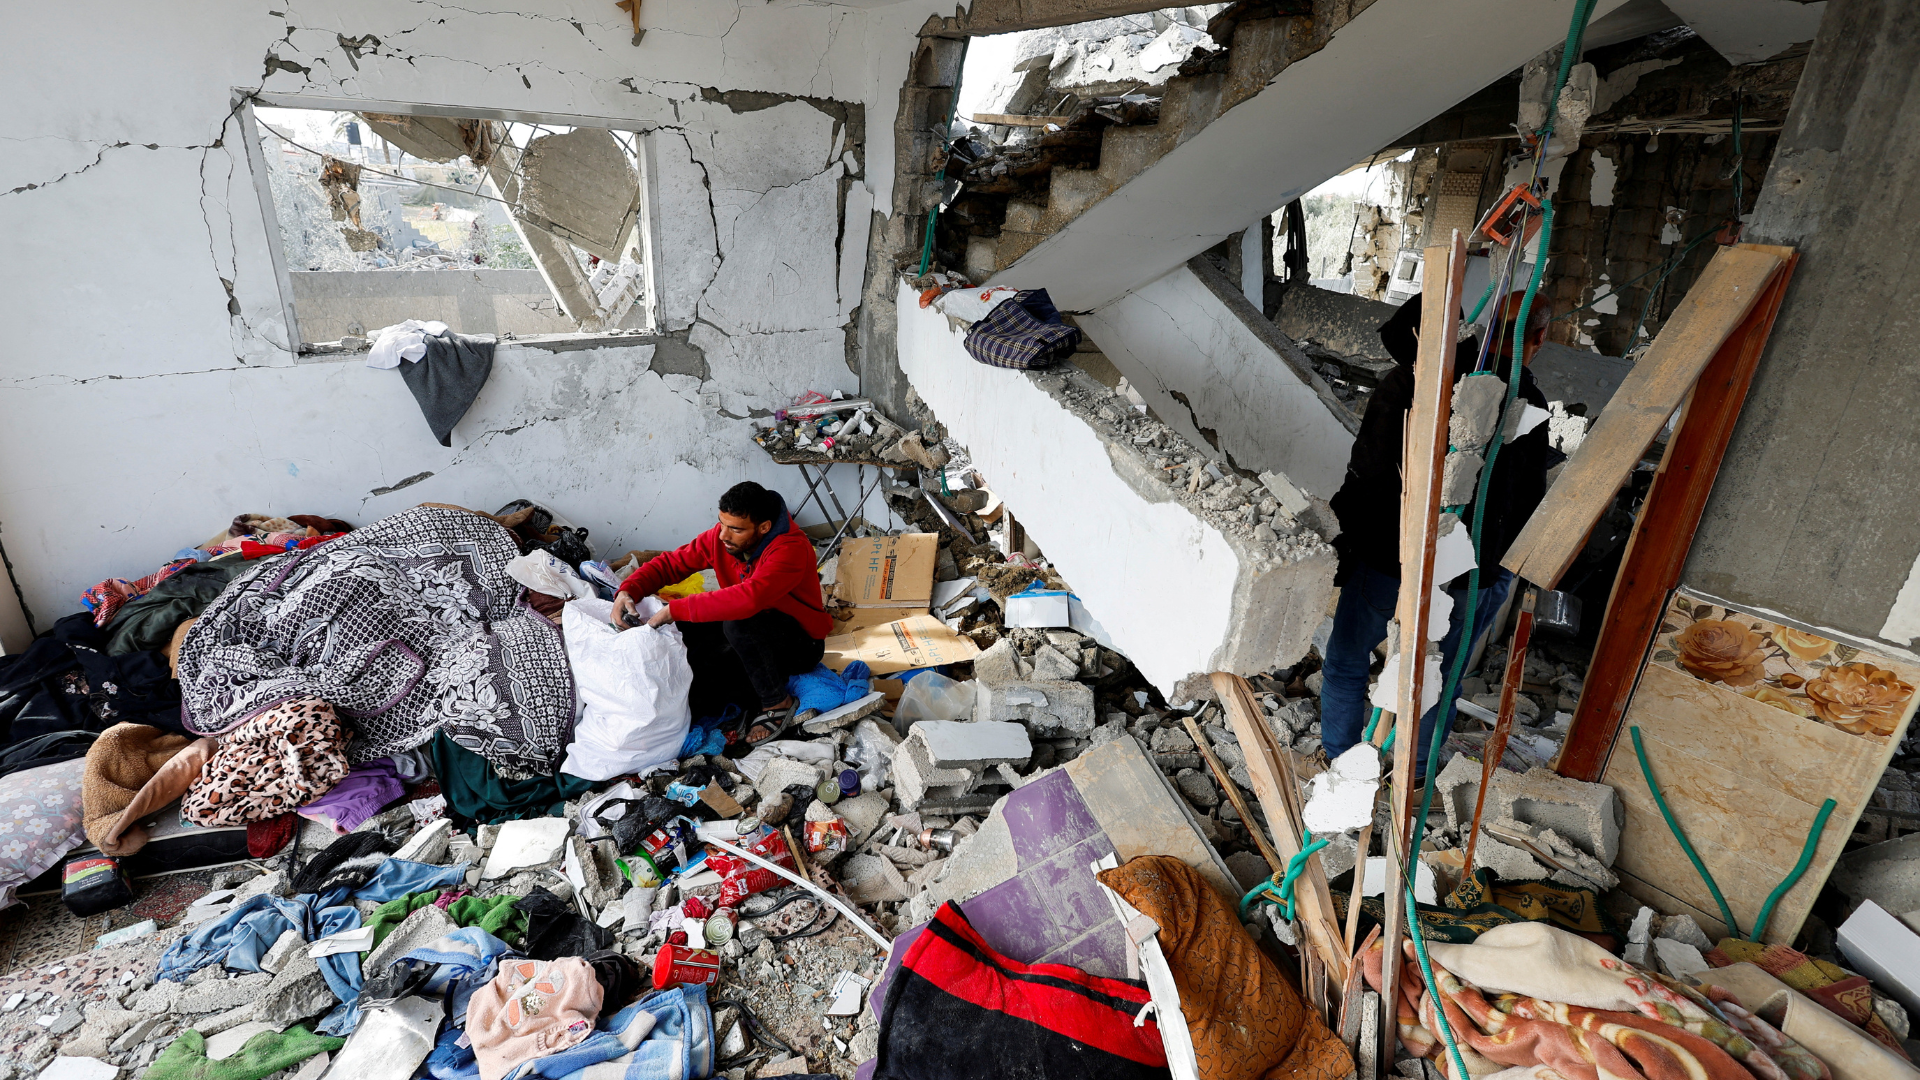 A Palestinian man retrieves belongings from the site of Israeli strikes on a house in Rafah. /Mohammed Salem/Reuters